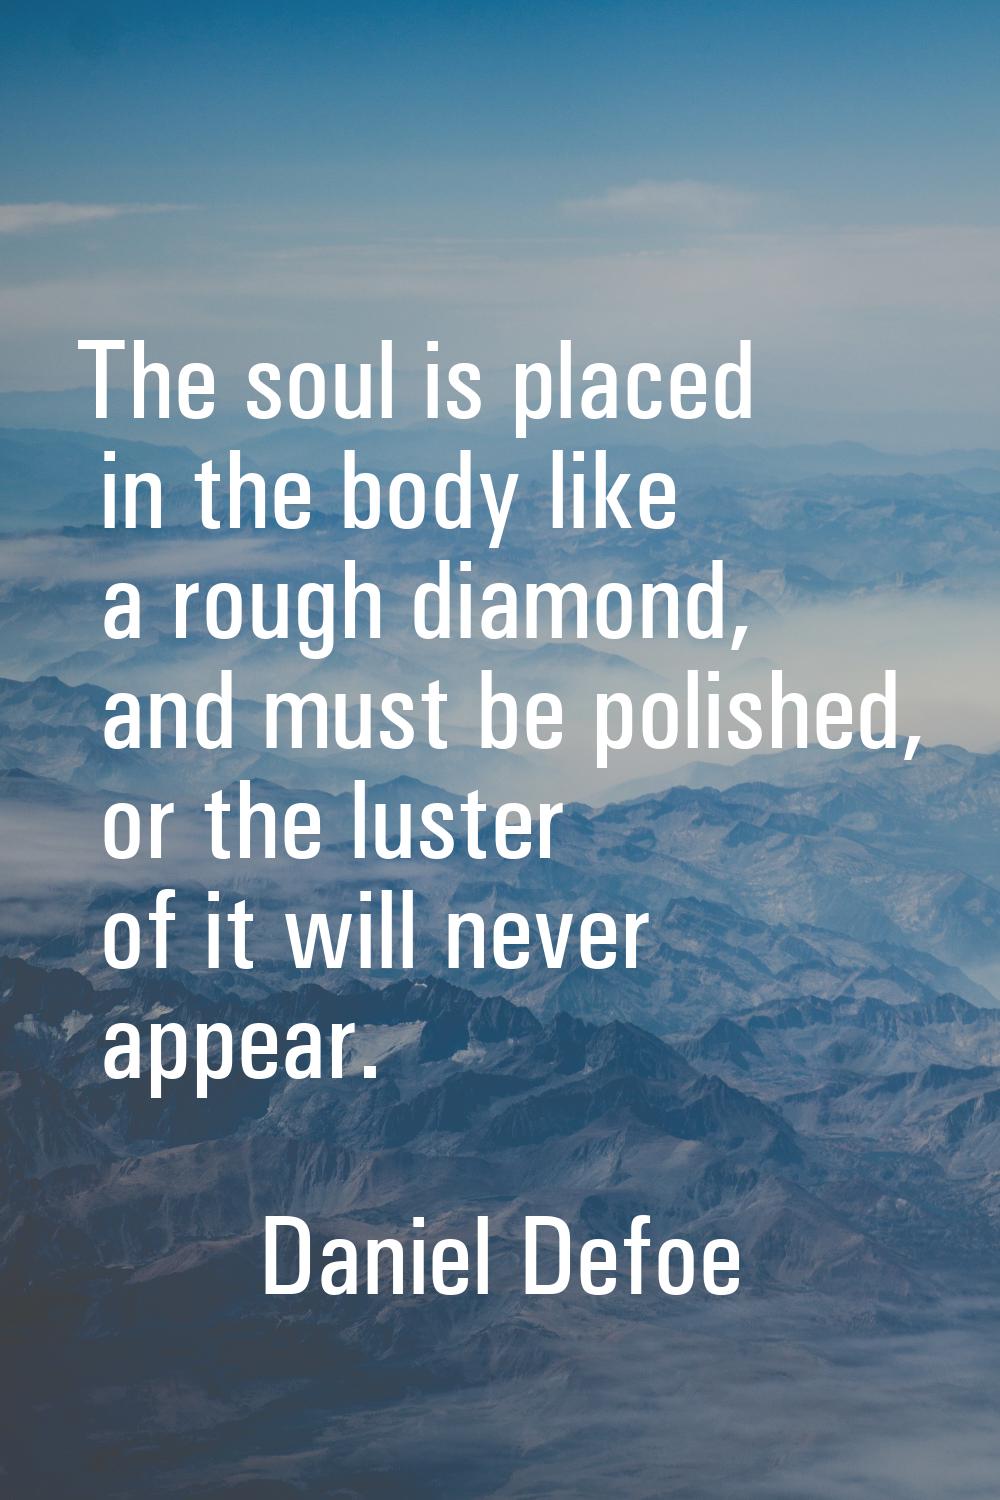 The soul is placed in the body like a rough diamond, and must be polished, or the luster of it will